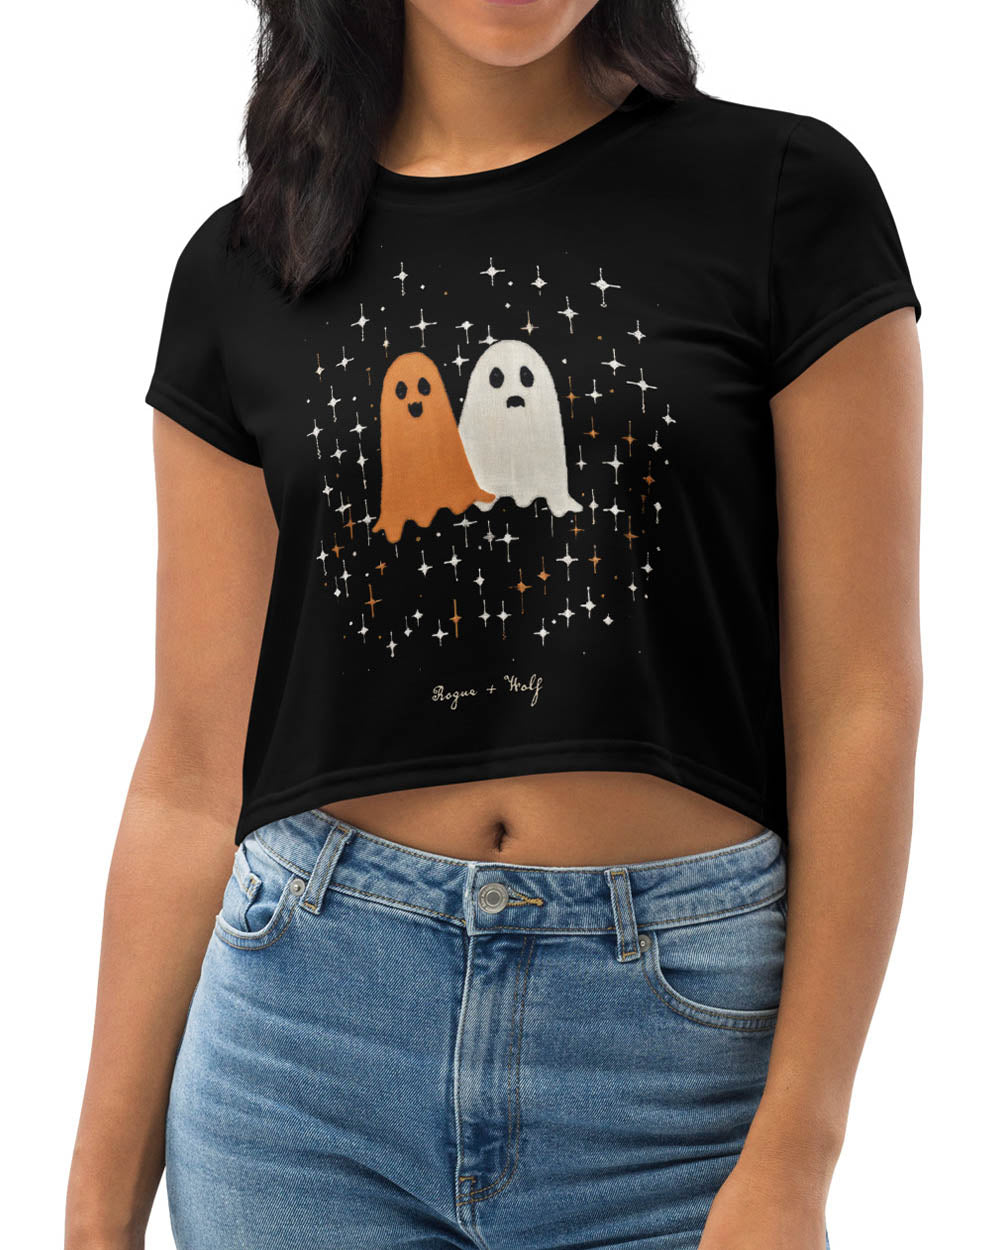 Ghost Besties Short Sleeve Crop Top - Dark Academia Spooky Ghosts Tee, Witchy Gothic Occult Fashion, Xmas Goth Gifts